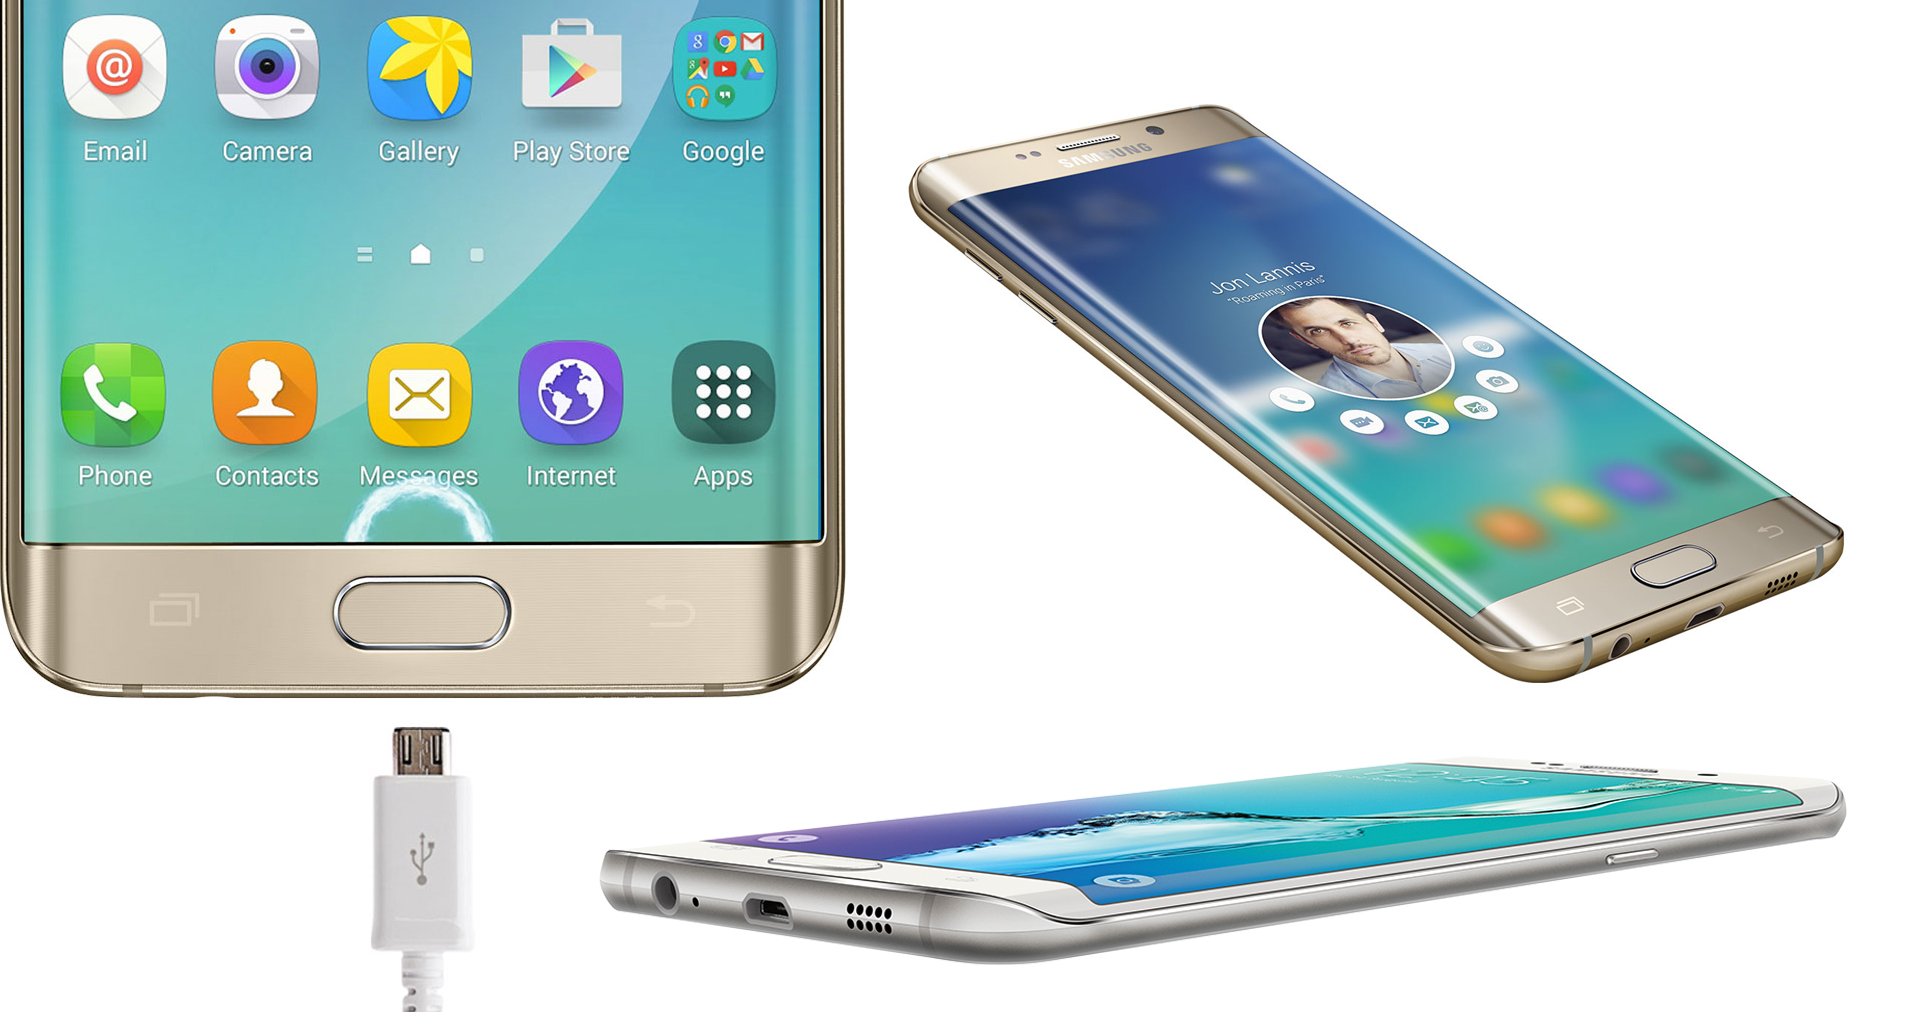 Samsung Galaxy specs, review, release date - PhonesData